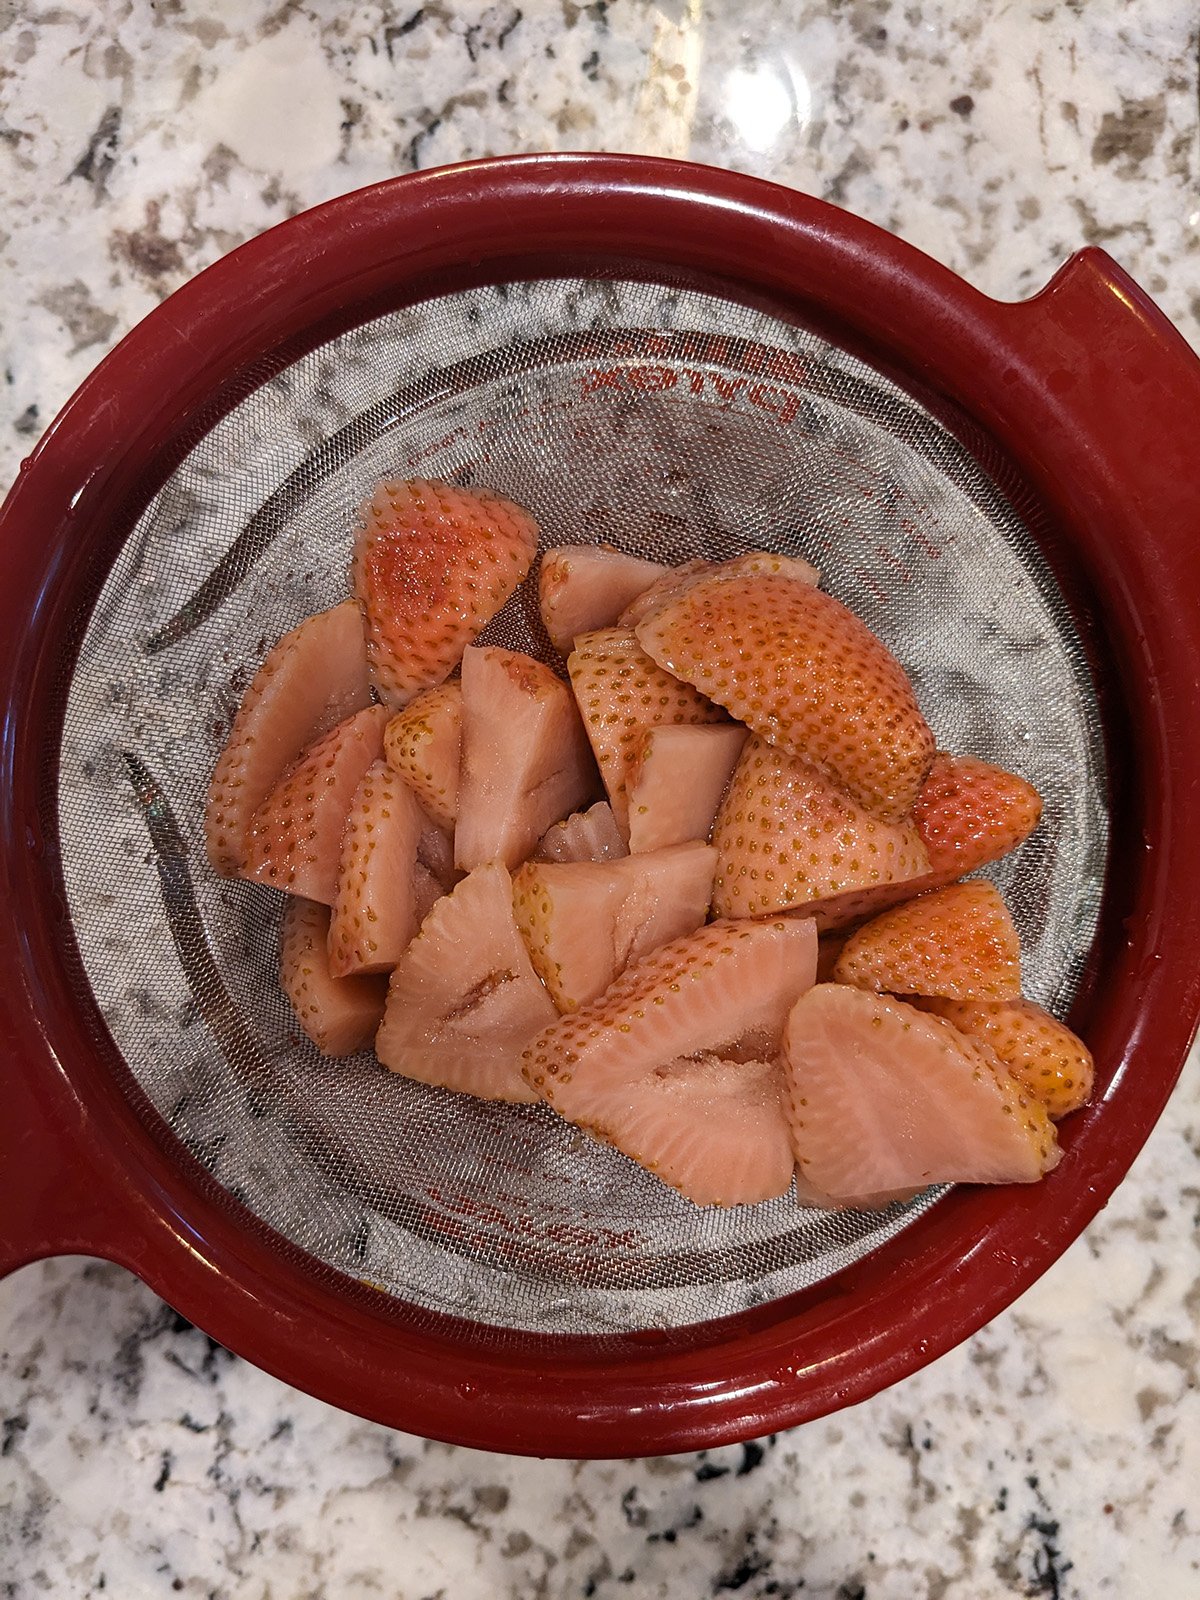 strawberries in a mesh strainer; the strawberries are pale in color.